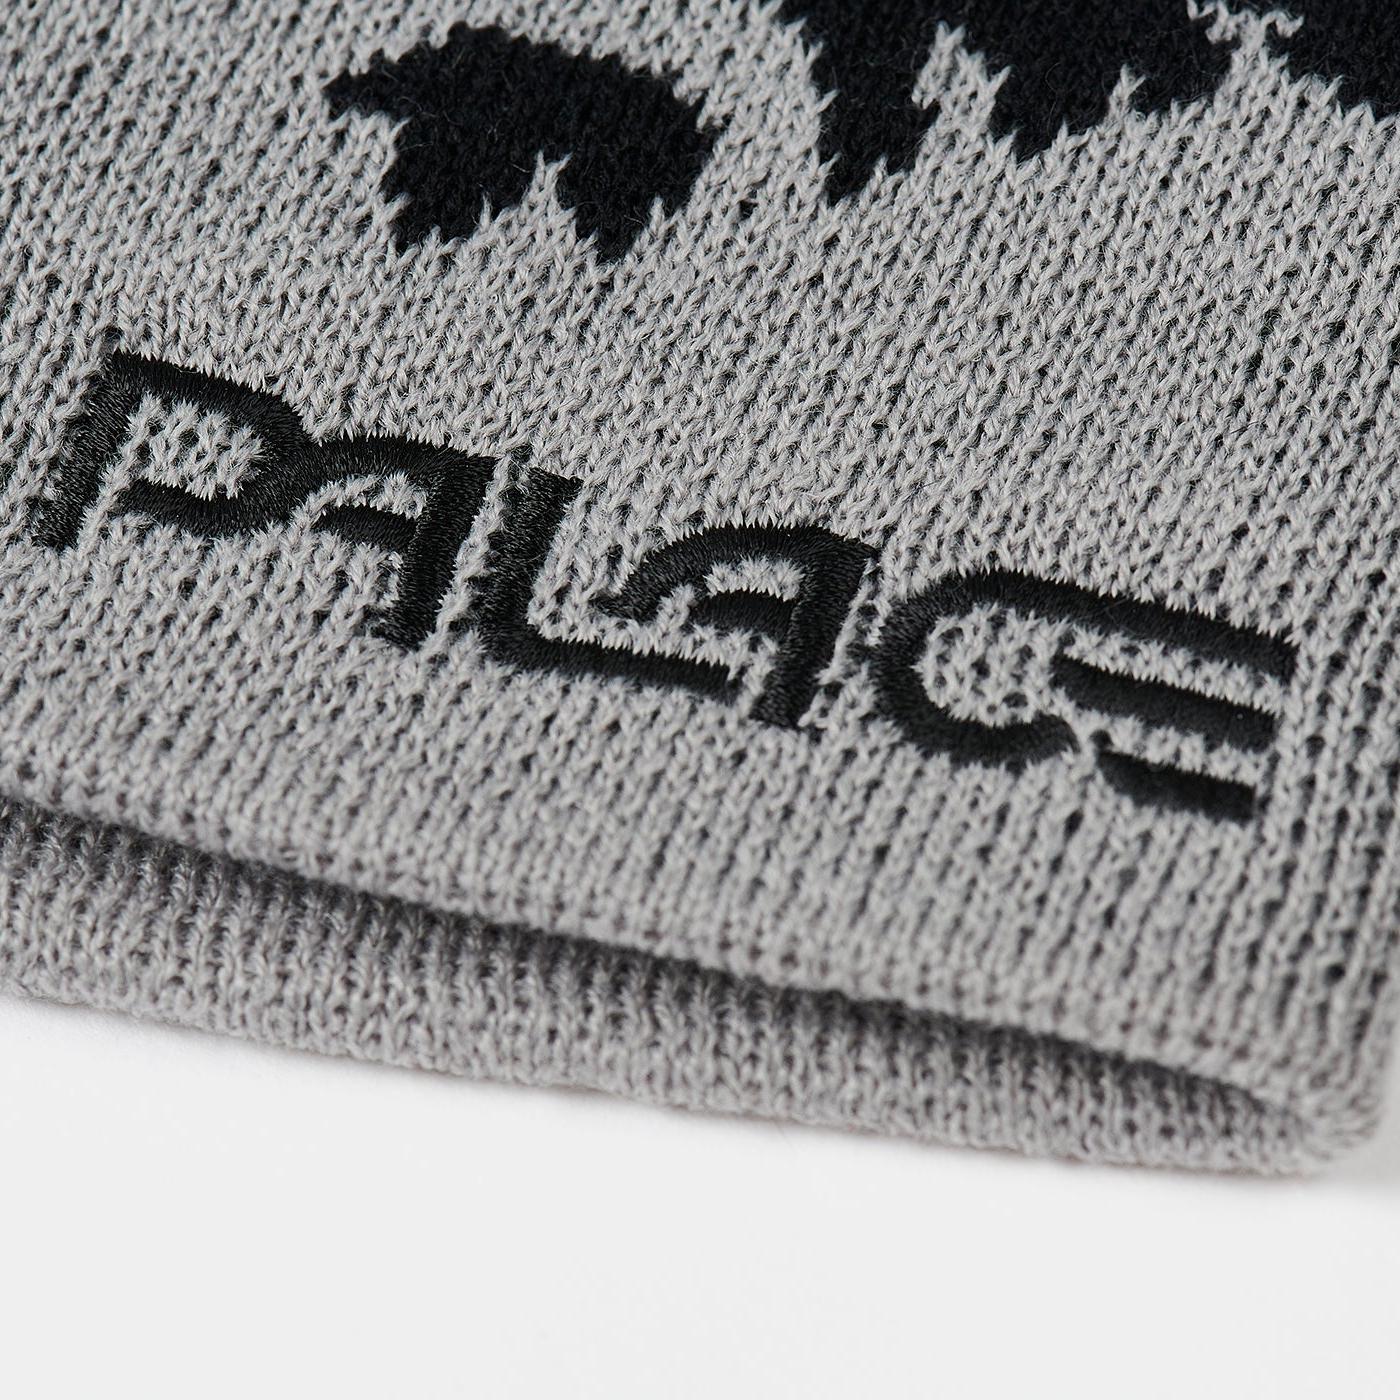 Thumbnail PALACE OAKLEY BEANIE GREY / BLACK one color